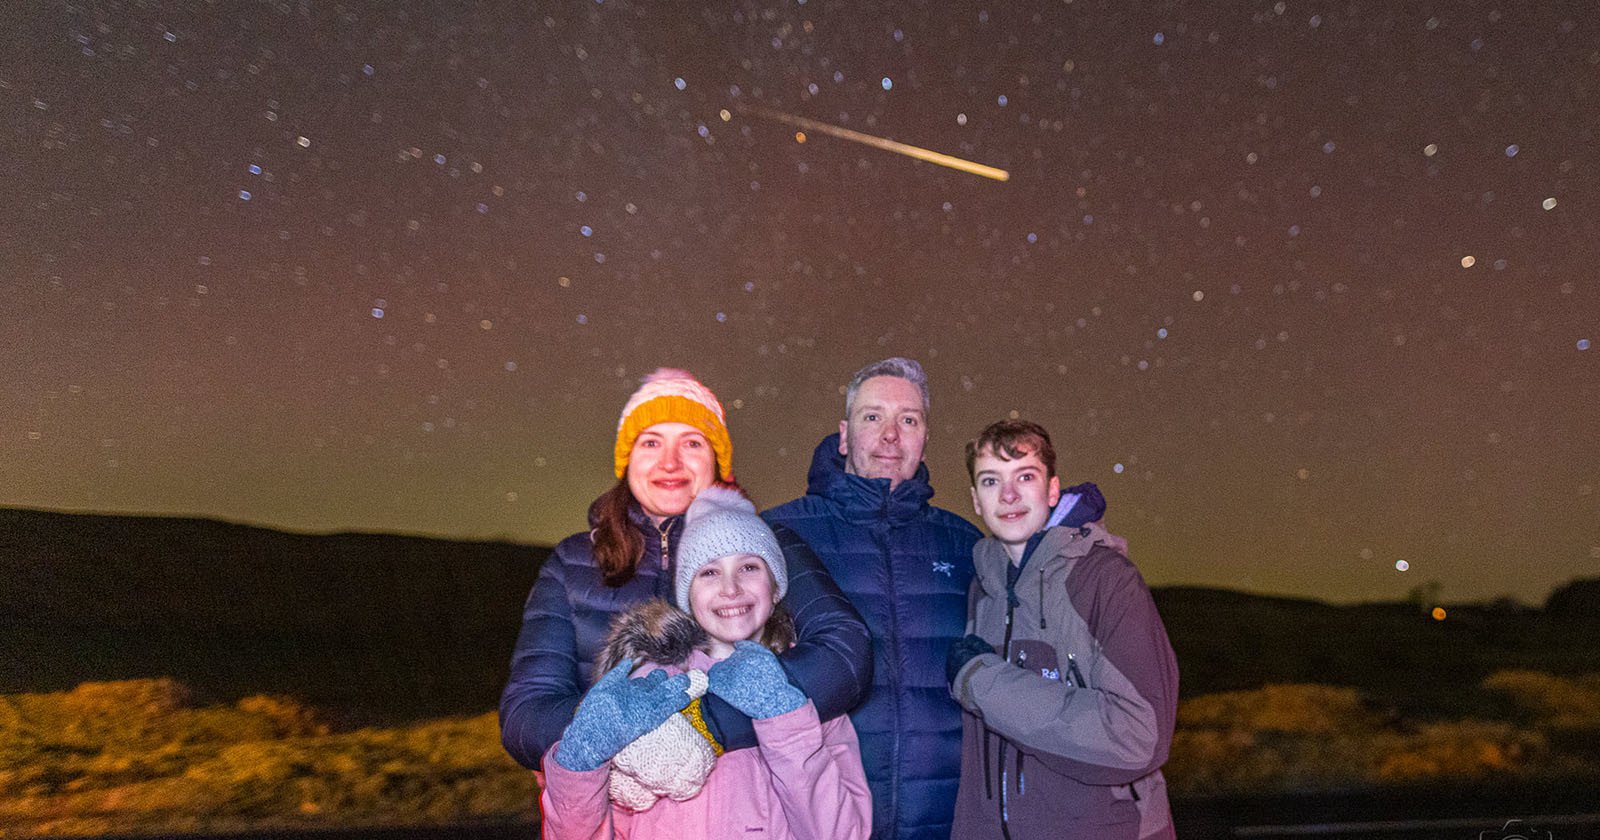  lucky photographer catches shooting star family photo 